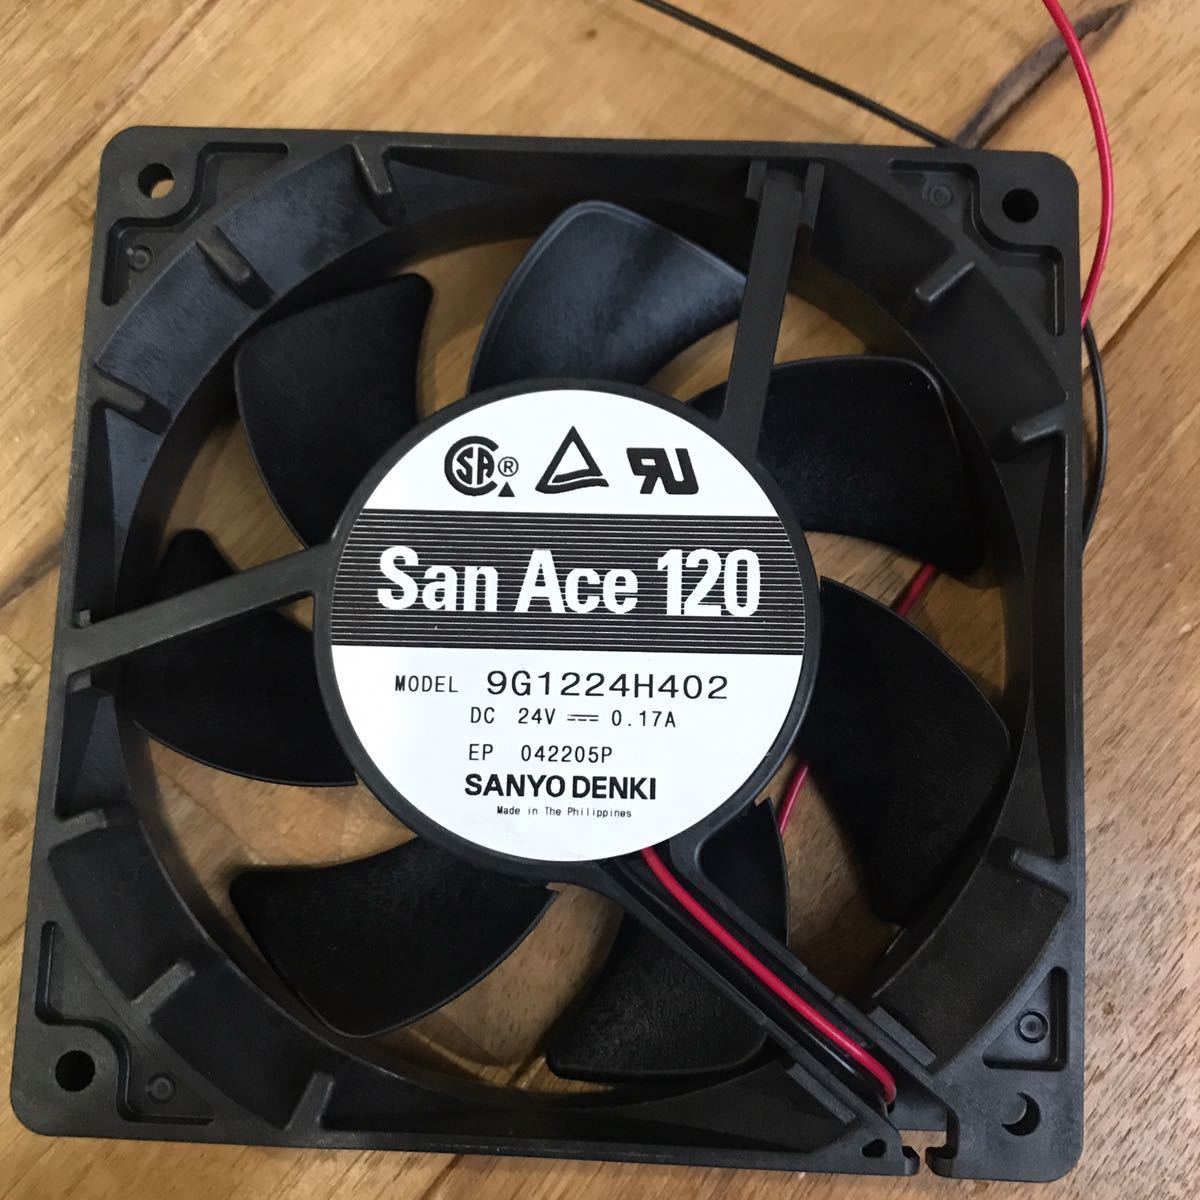 DC fan DC24V drive 120mm angle 25mm thickness 2850r/min 9G1224H402 finger guard attaching cooling fan SanAce120 mountain . electric 